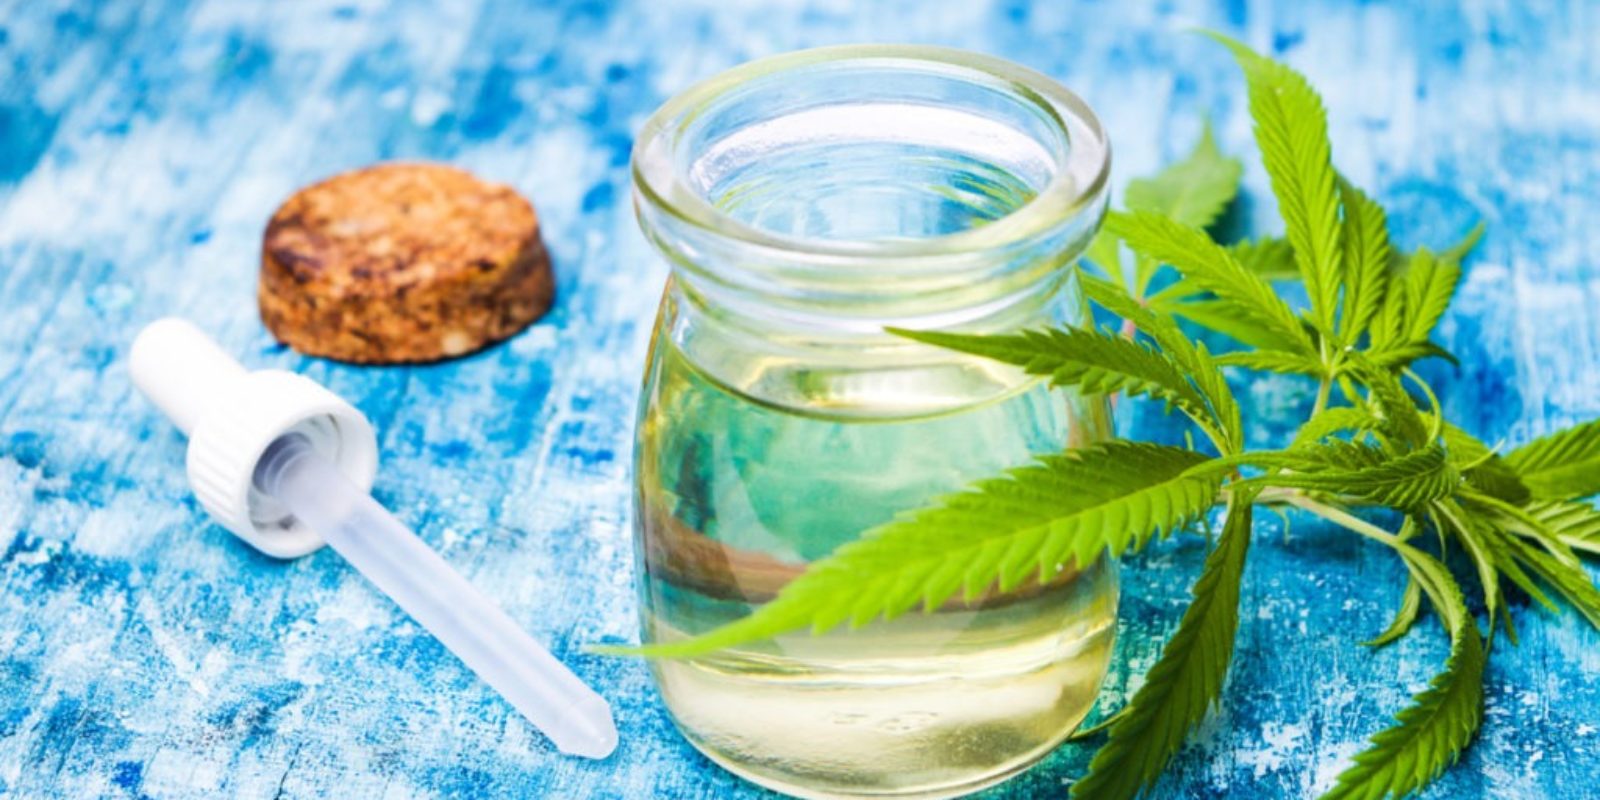 glass-container-of-hemp-cbd-oil-on-table-with-dropper-and-cannabis-leaves